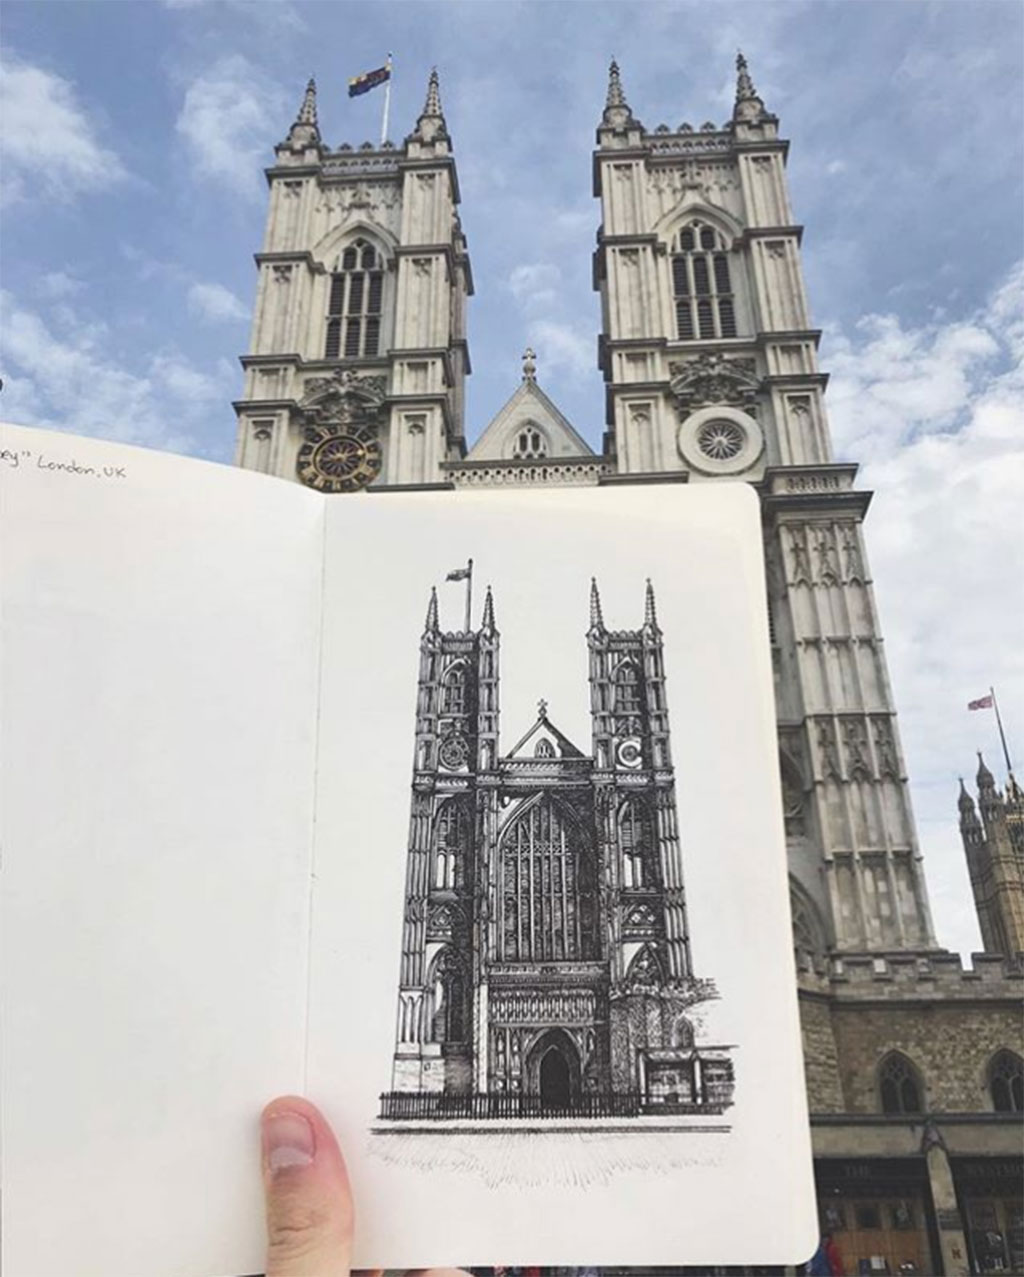 Drawing of Westminister Abbey with sketch held up to compare to the actual building